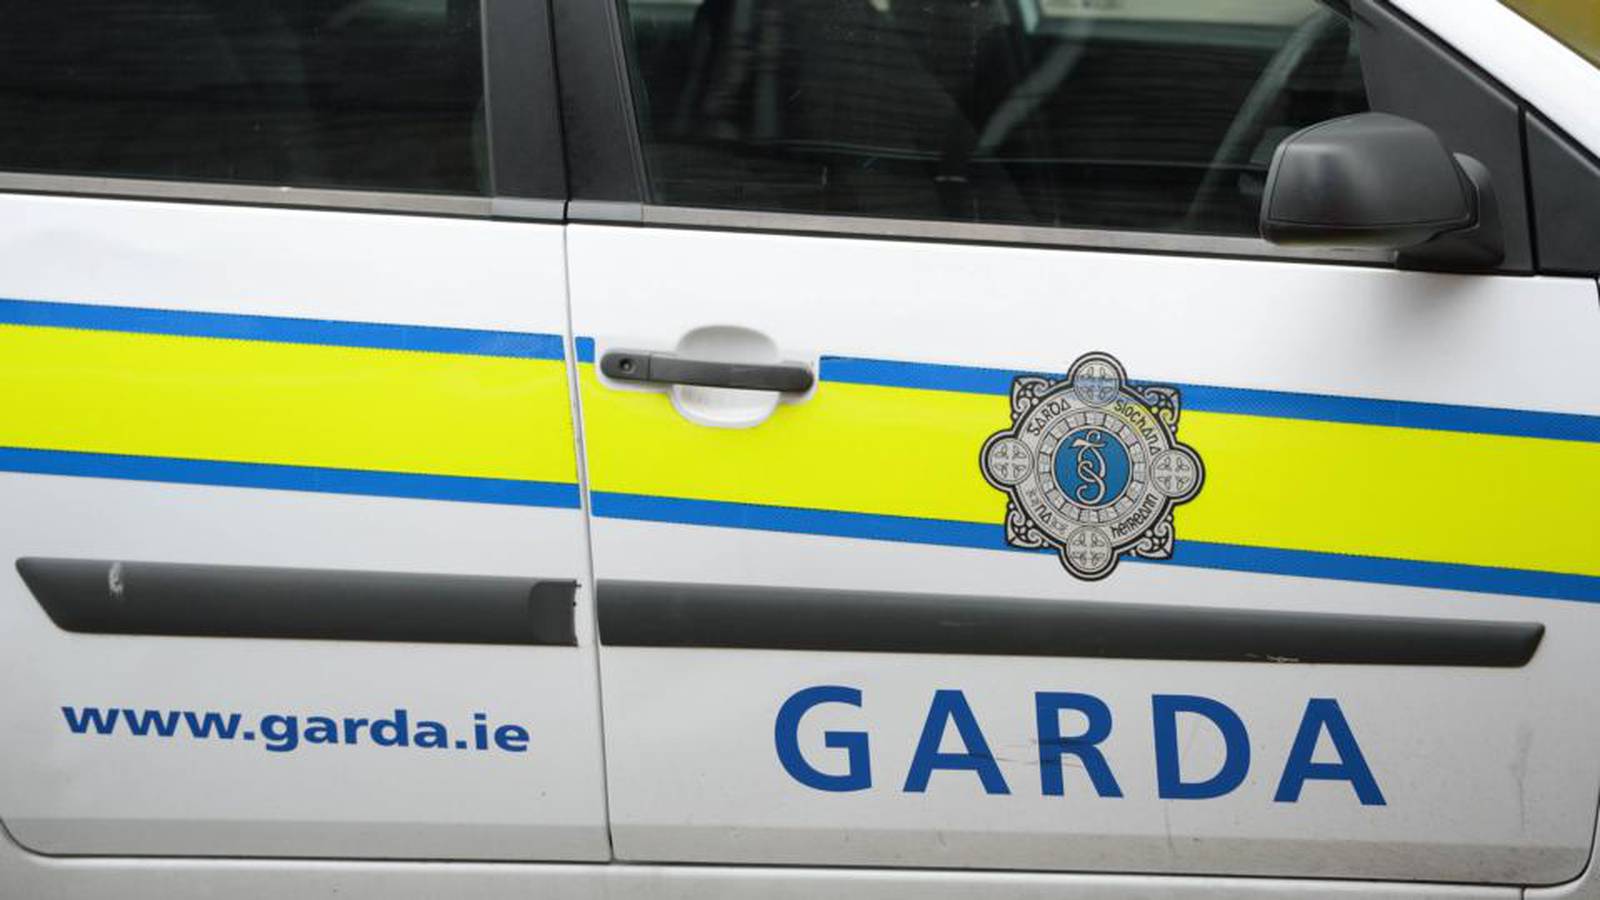 The man (20s) is due to appear before Blanchardstown District Court in relation to the seizure on Wednesday morning.jpg